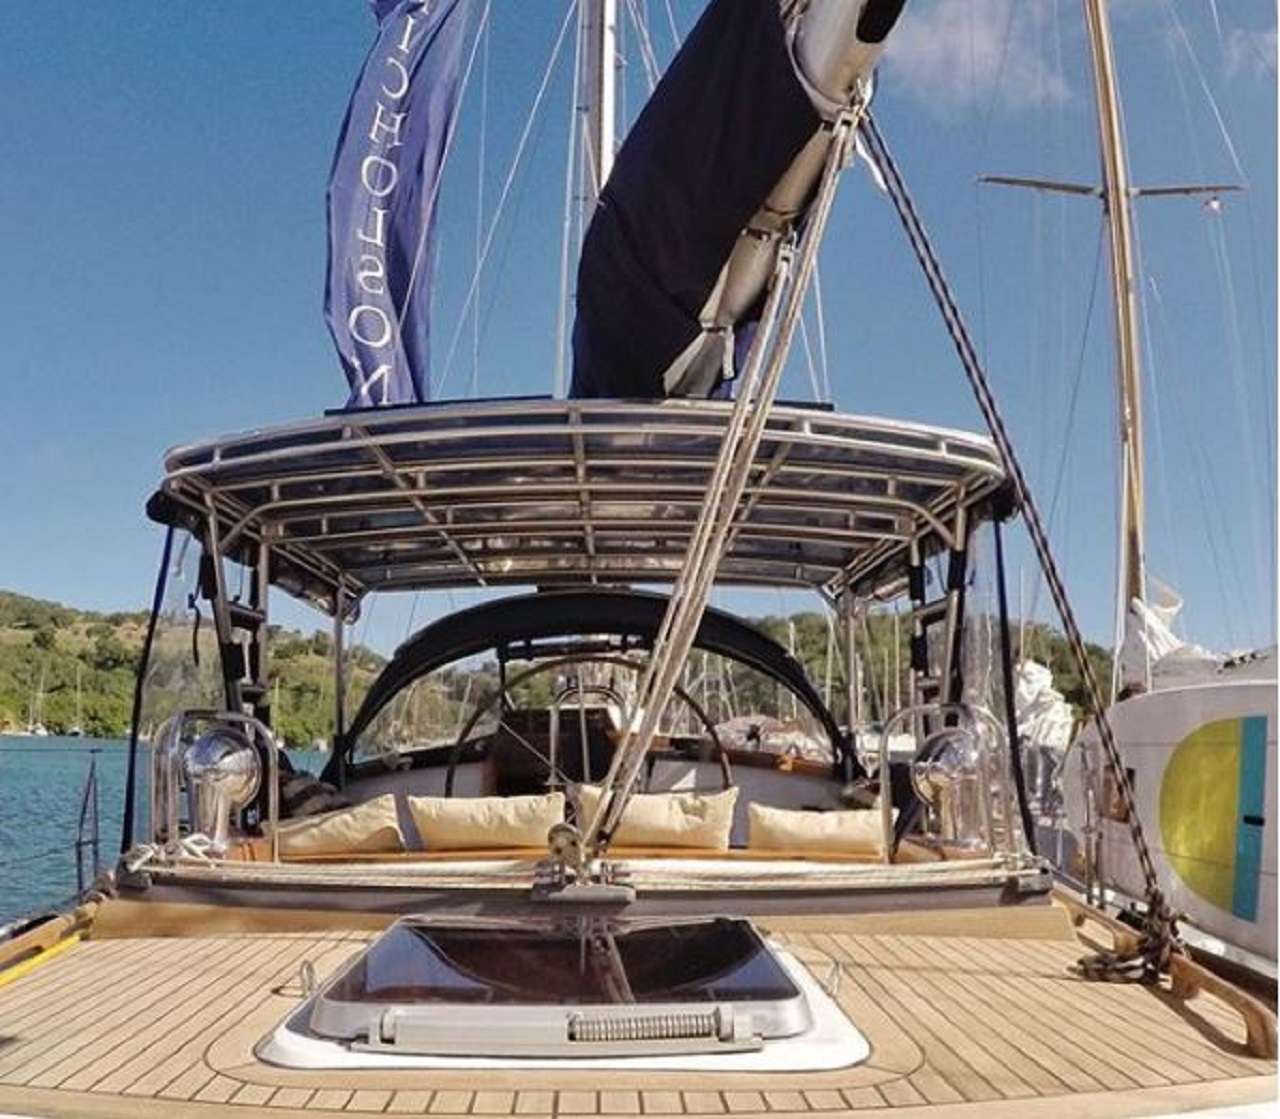 Sailing Yacht 'THE DOVE' Tobago Cays, 4 PAX, 2 Crew, 54.00 Ft, 16.00 Meters, Built 1988, W.I. Crealock, Refit Year Last Refit: 2015